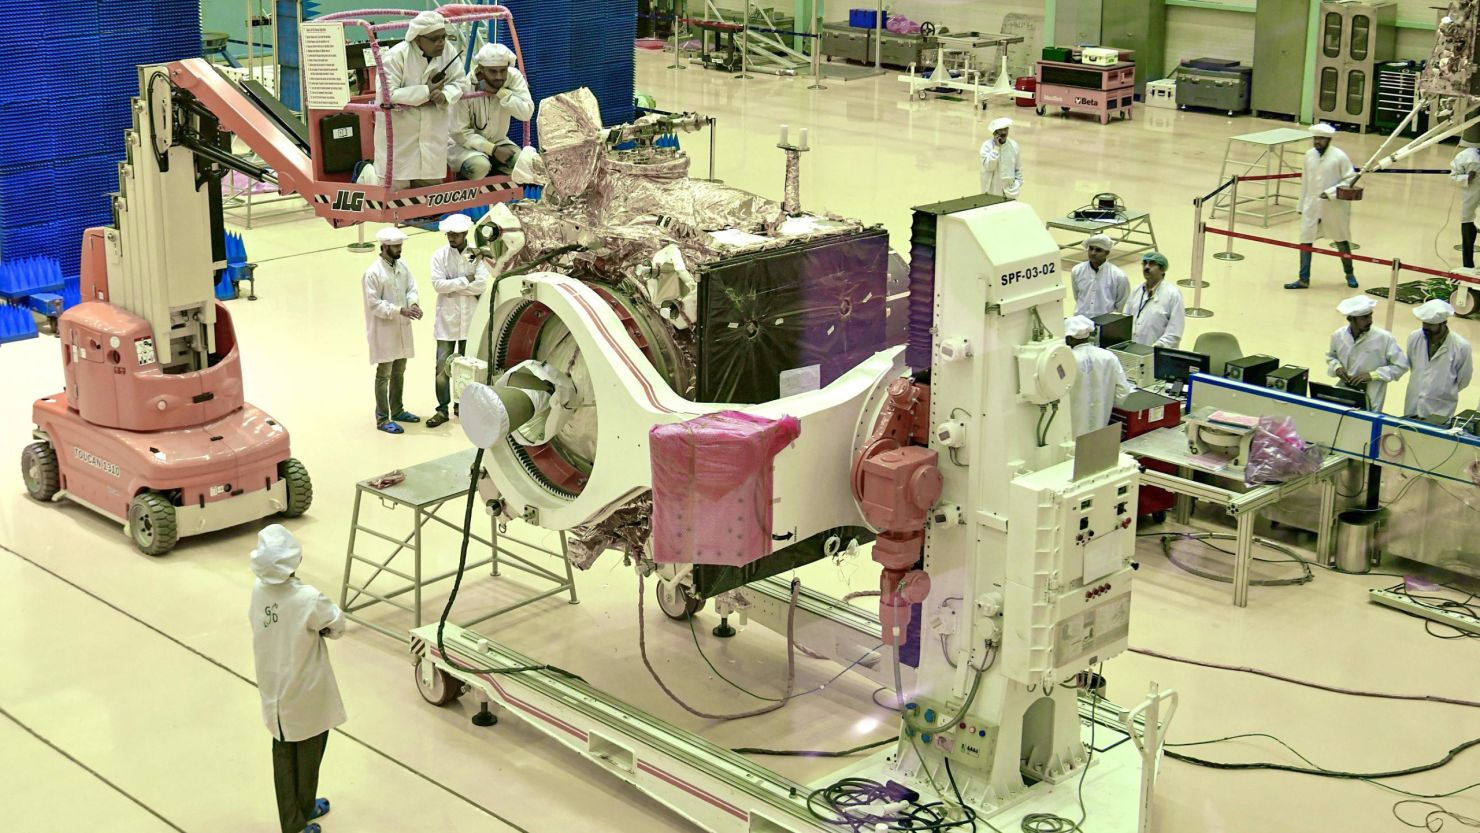 Scientists work on the orbiter vehicle of "Chandrayaan-2" for India's first moon lander and rover mission.